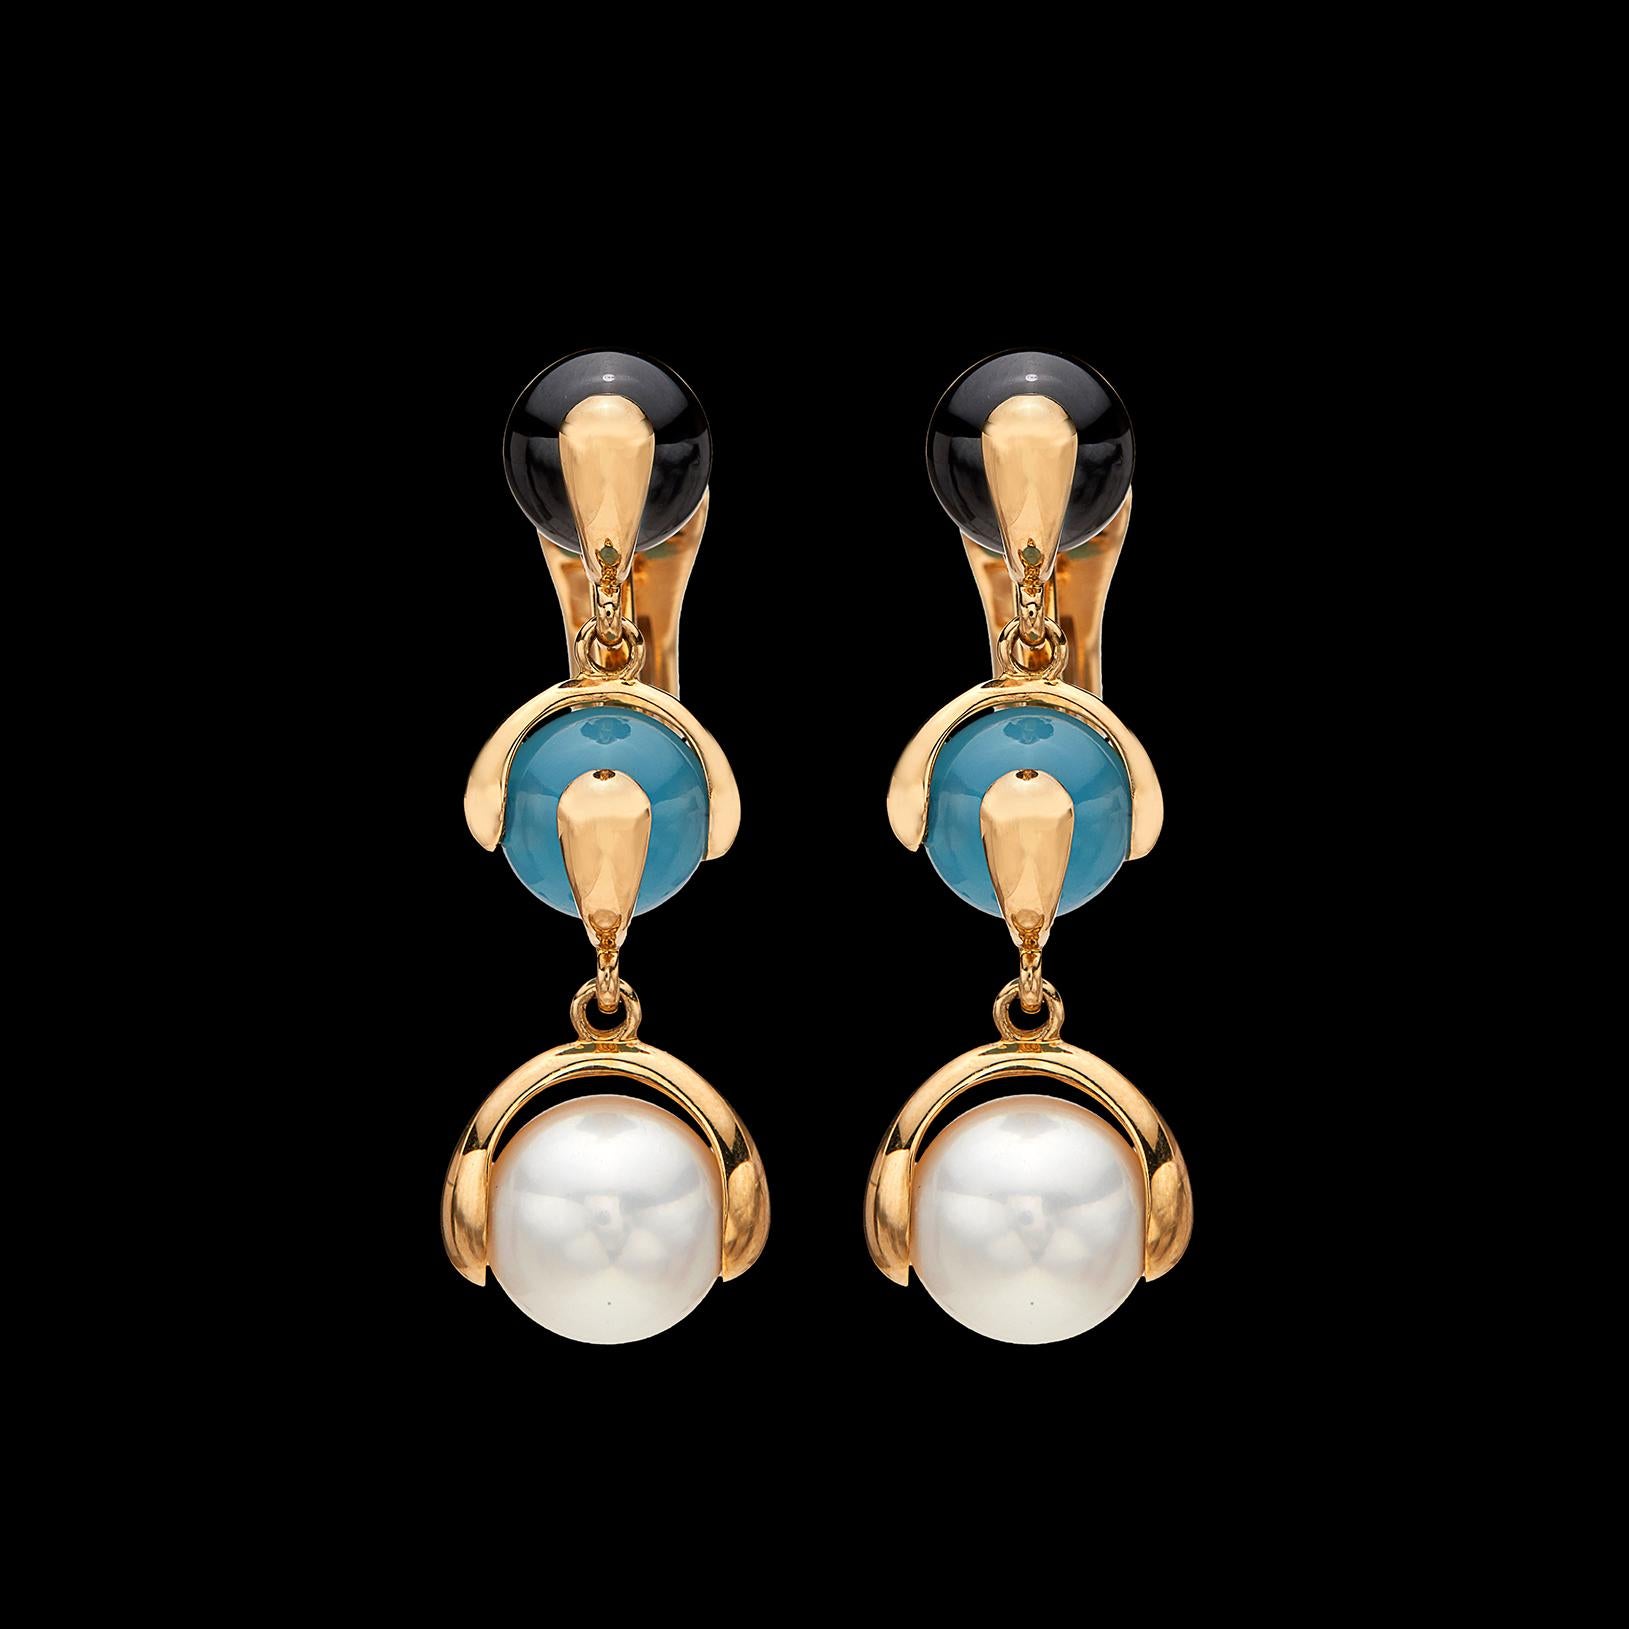 Playful and bold earrings by famed Italian designer Marina B. of the one and only Bulgari family. The 18k gold drop earrings are designed with 9.5mm cultured pearls, together with blue chalcedony and black spinel beads, and will brighten any outfit.